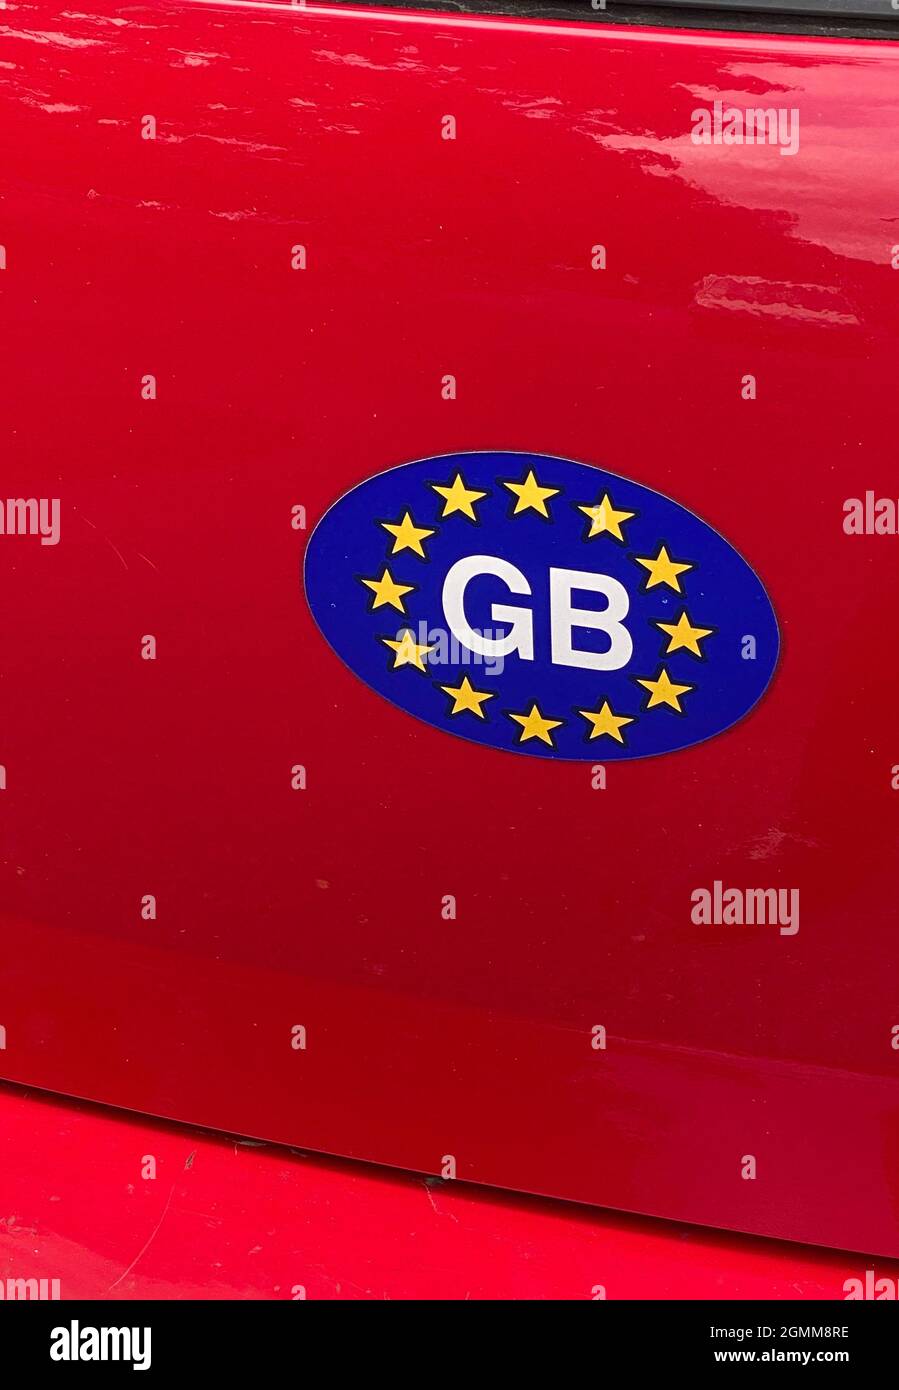 London, UK. 11th Sep, 2021. A "GB" sticker with European stars is stuck on a car. The country is called the United Kingdom, but the international identifier has been "GB" for decades. That is now changing. Soon, British cars will have to have a "UK" sticker when traveling to the EU. (to dpa "Symbol for union after Brexit: "UK" instead of "GB" on British cars") Credit: Benedikt von Imhoff/dpa/Alamy Live News Stock Photo